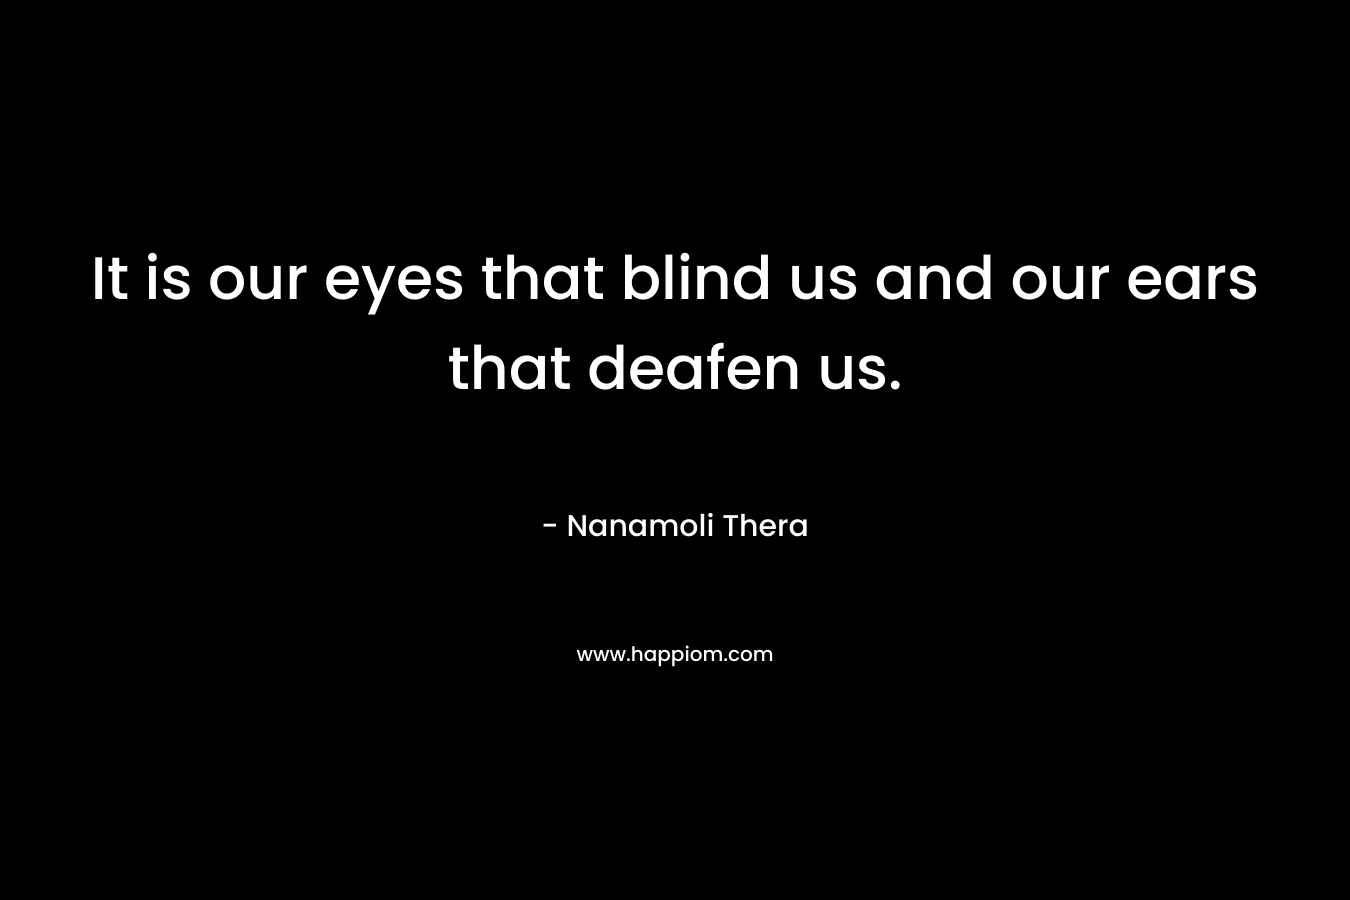 It is our eyes that blind us and our ears that deafen us. – Nanamoli Thera